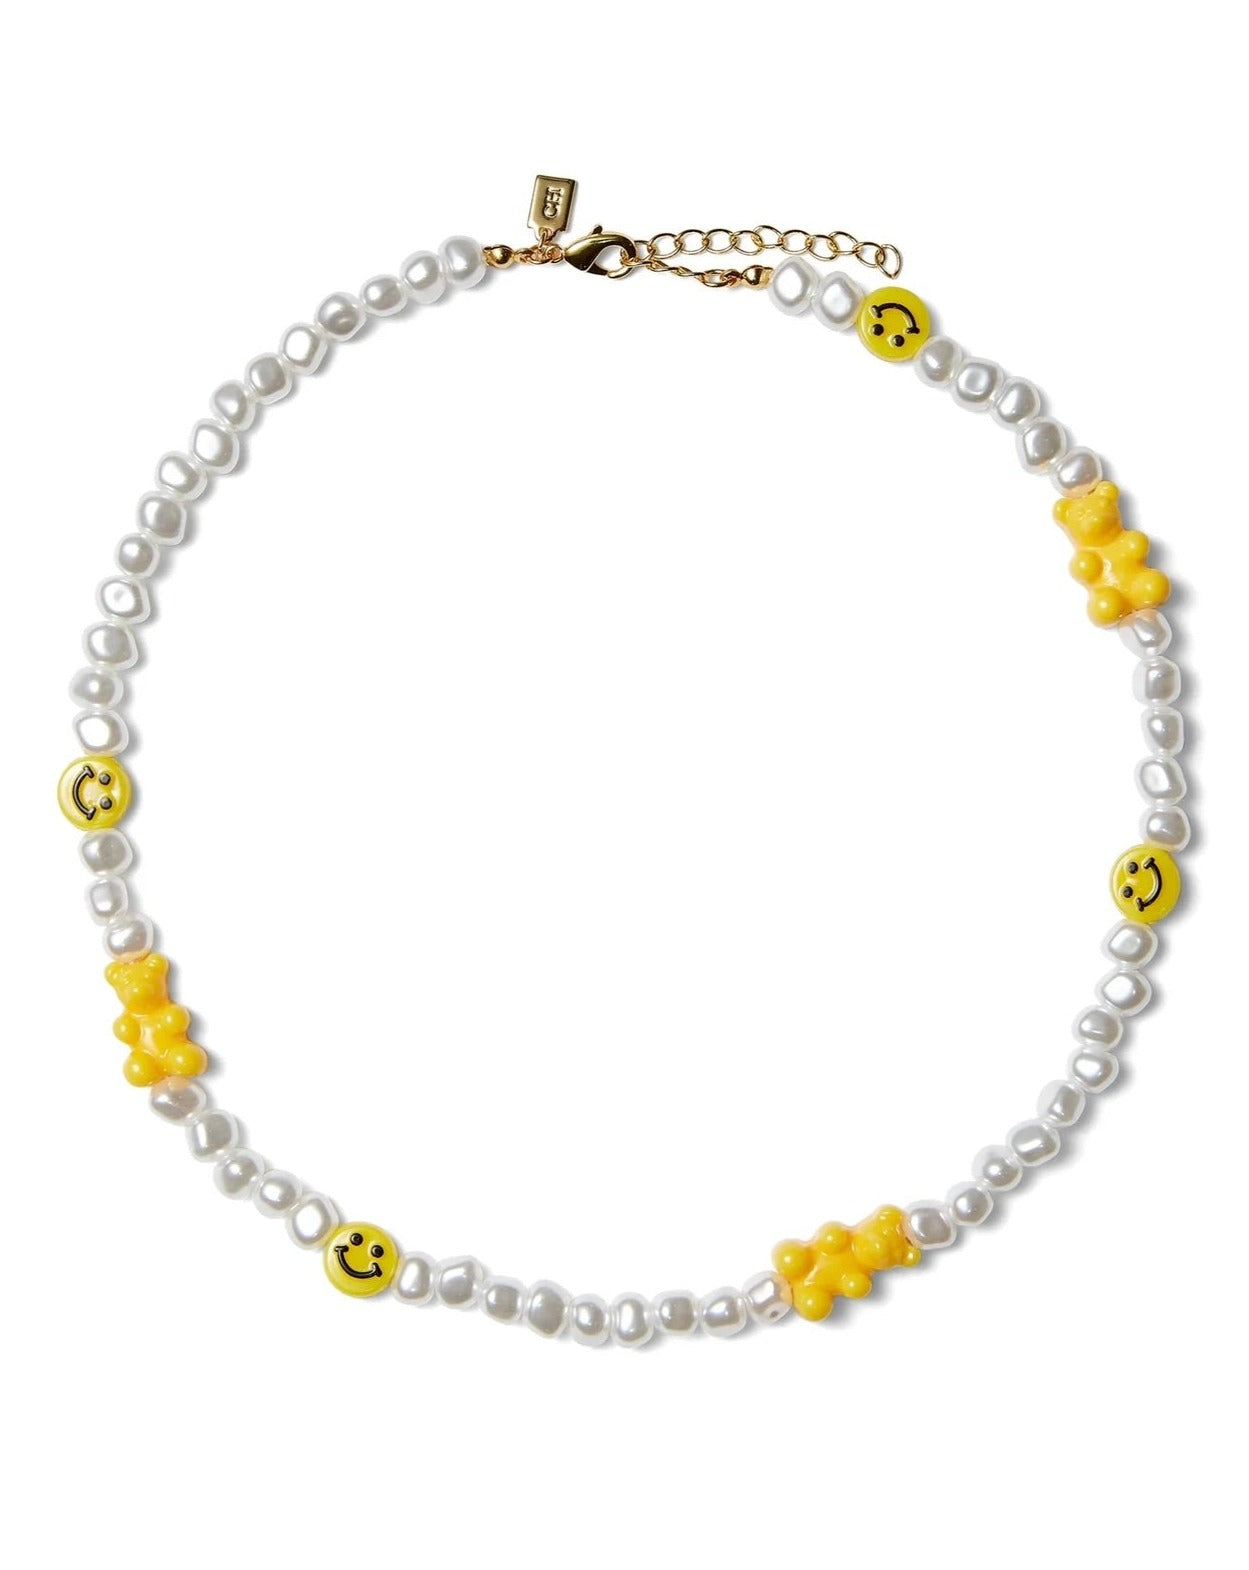 Yellow NYC Taxi necklace by Crystal Haze